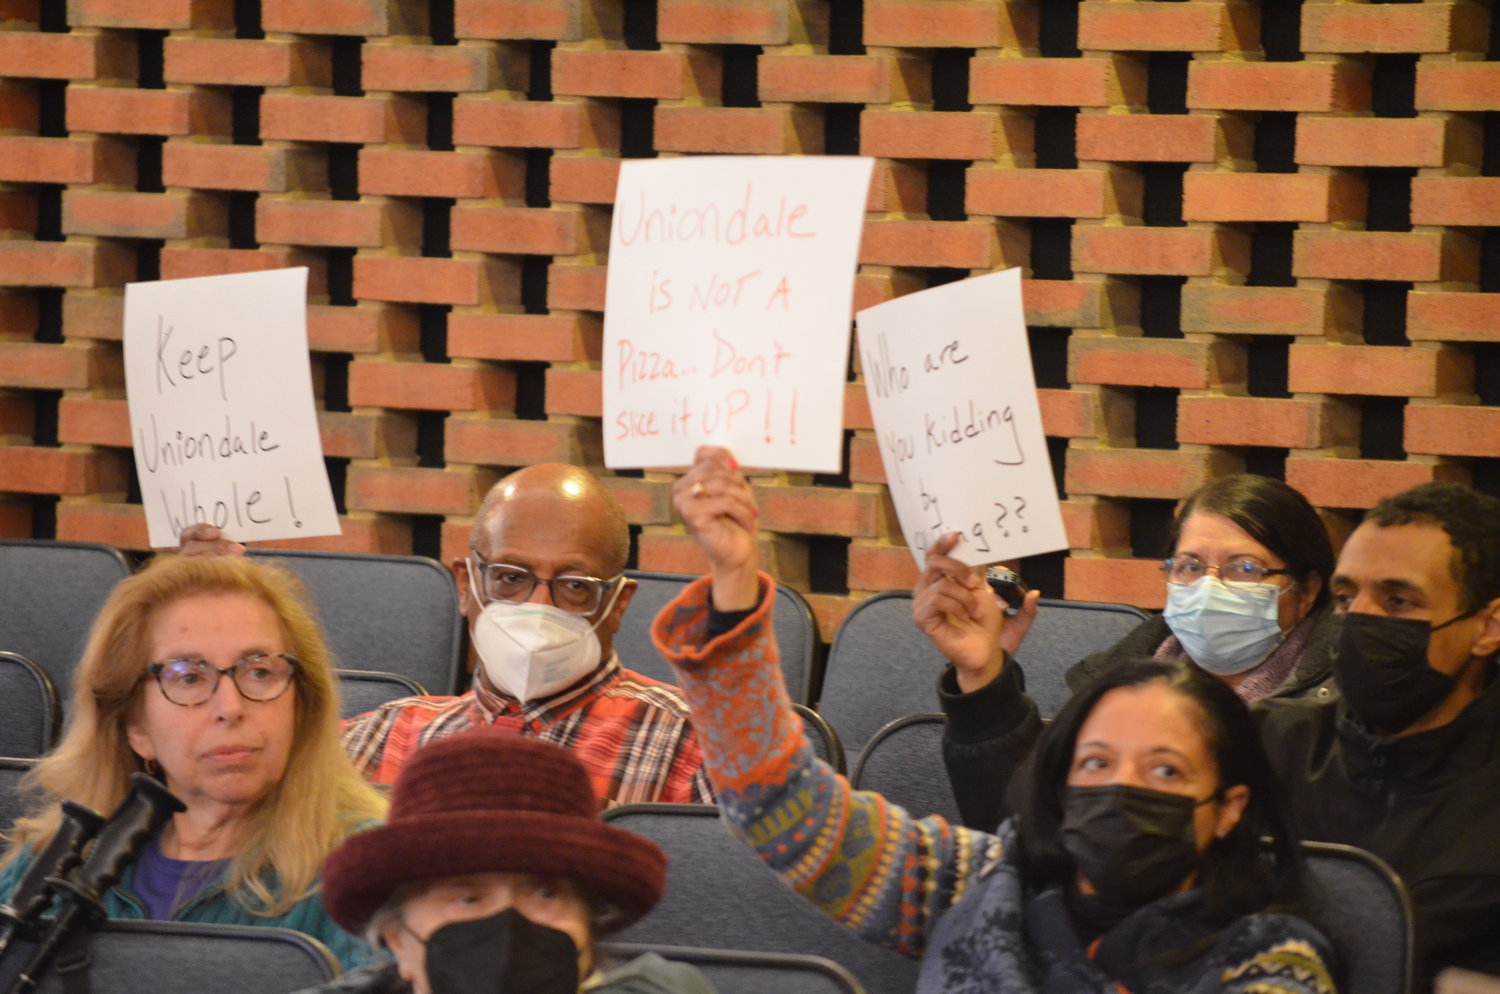 People filled the observer area, holding handmade signs demanding their communities be kept whole. Town officials were getting ready to approve a new map redrawing district lines for local elected officials — a map many of them opposed.